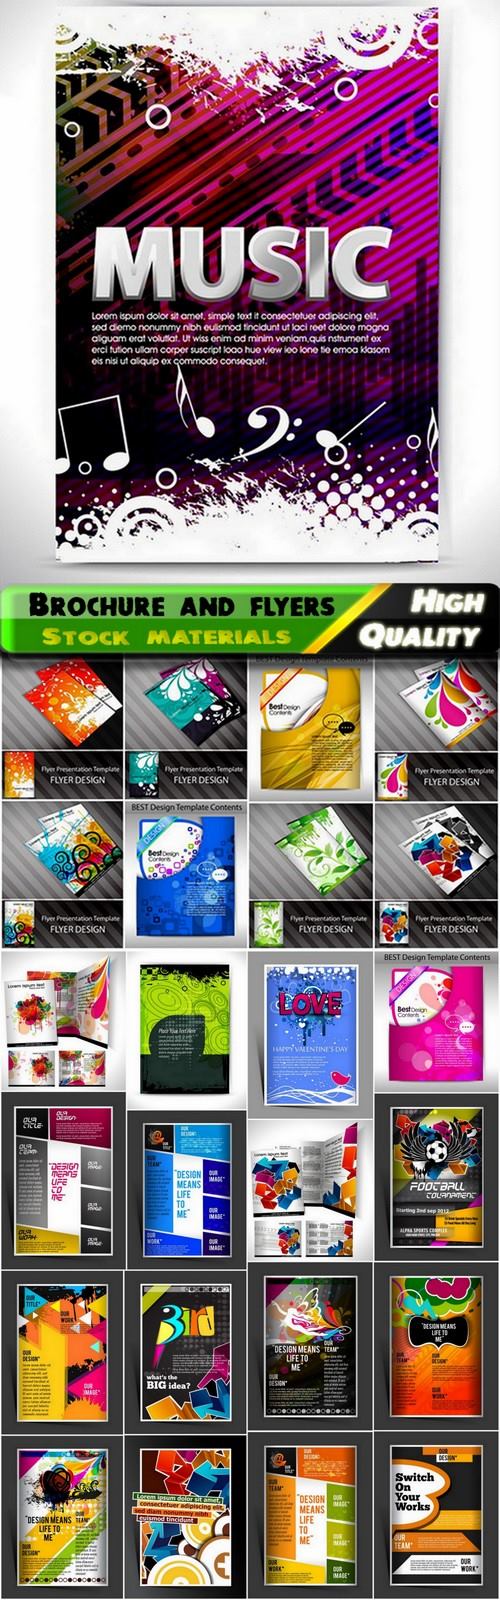 Brochure and flyers template design in vector from stock #55 - 25 Eps